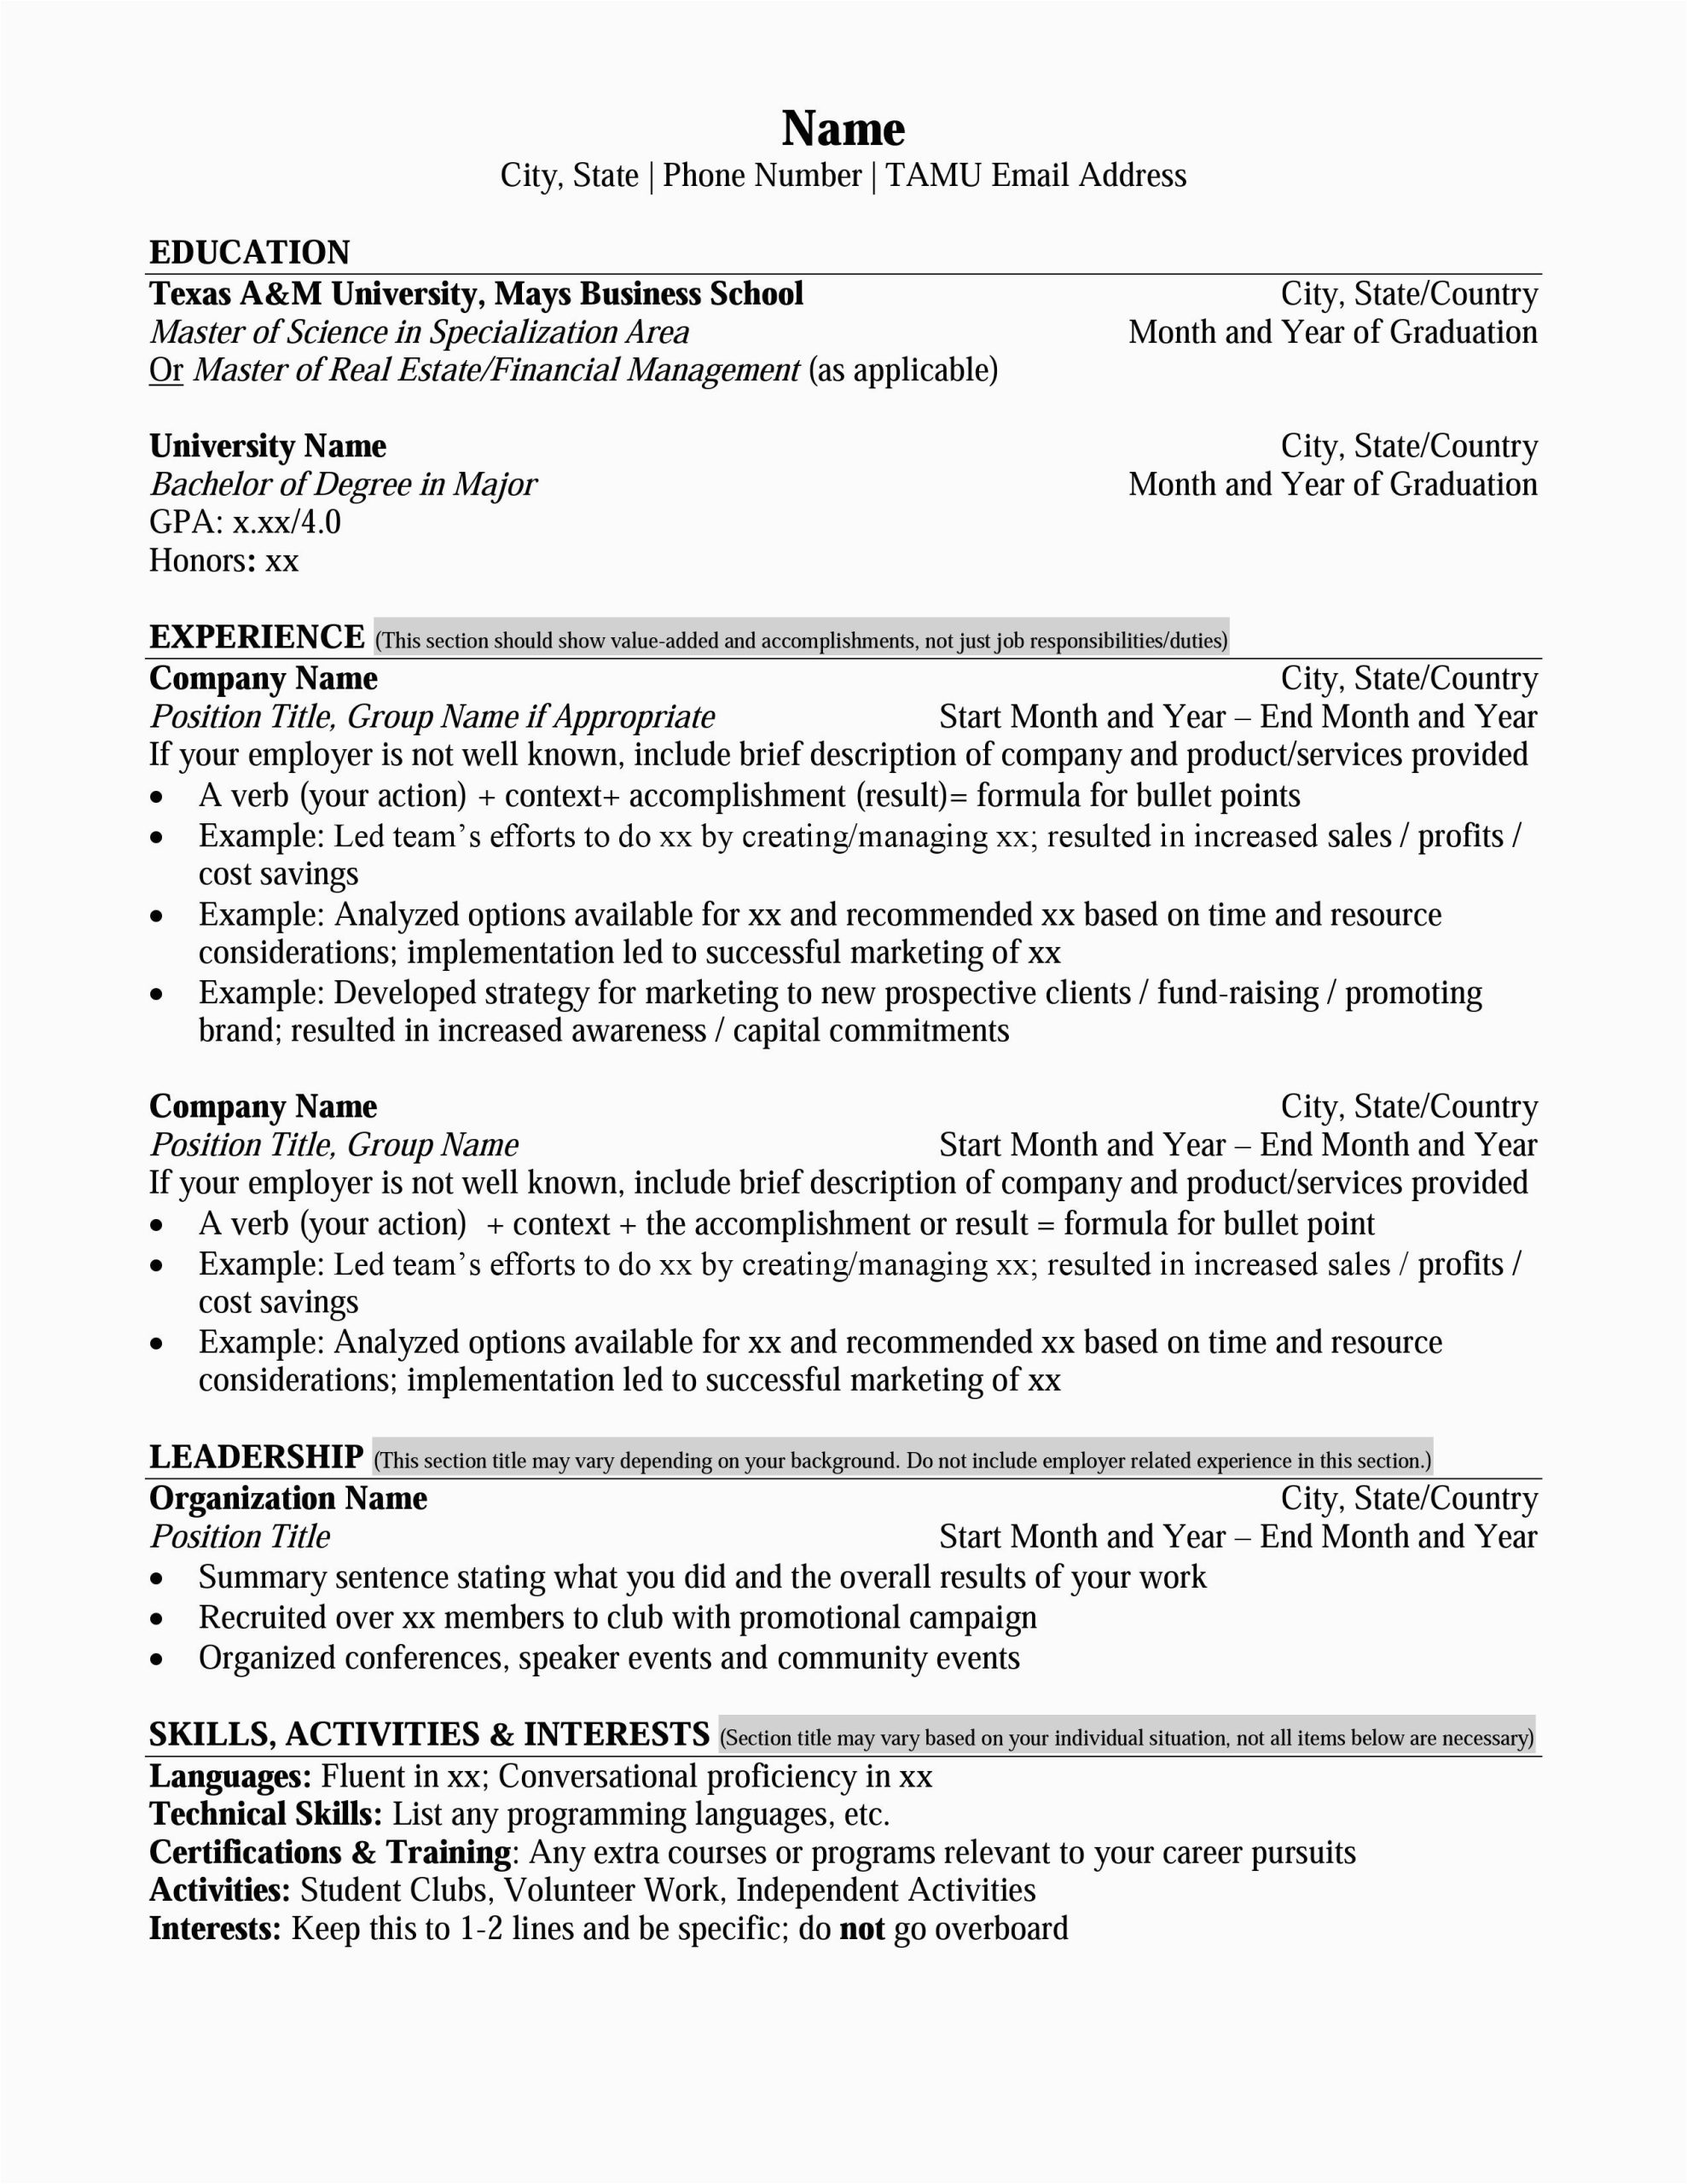 Sample Resume with Bachelors and Masters Degrees Mays Masters Resume format – Career Management Center